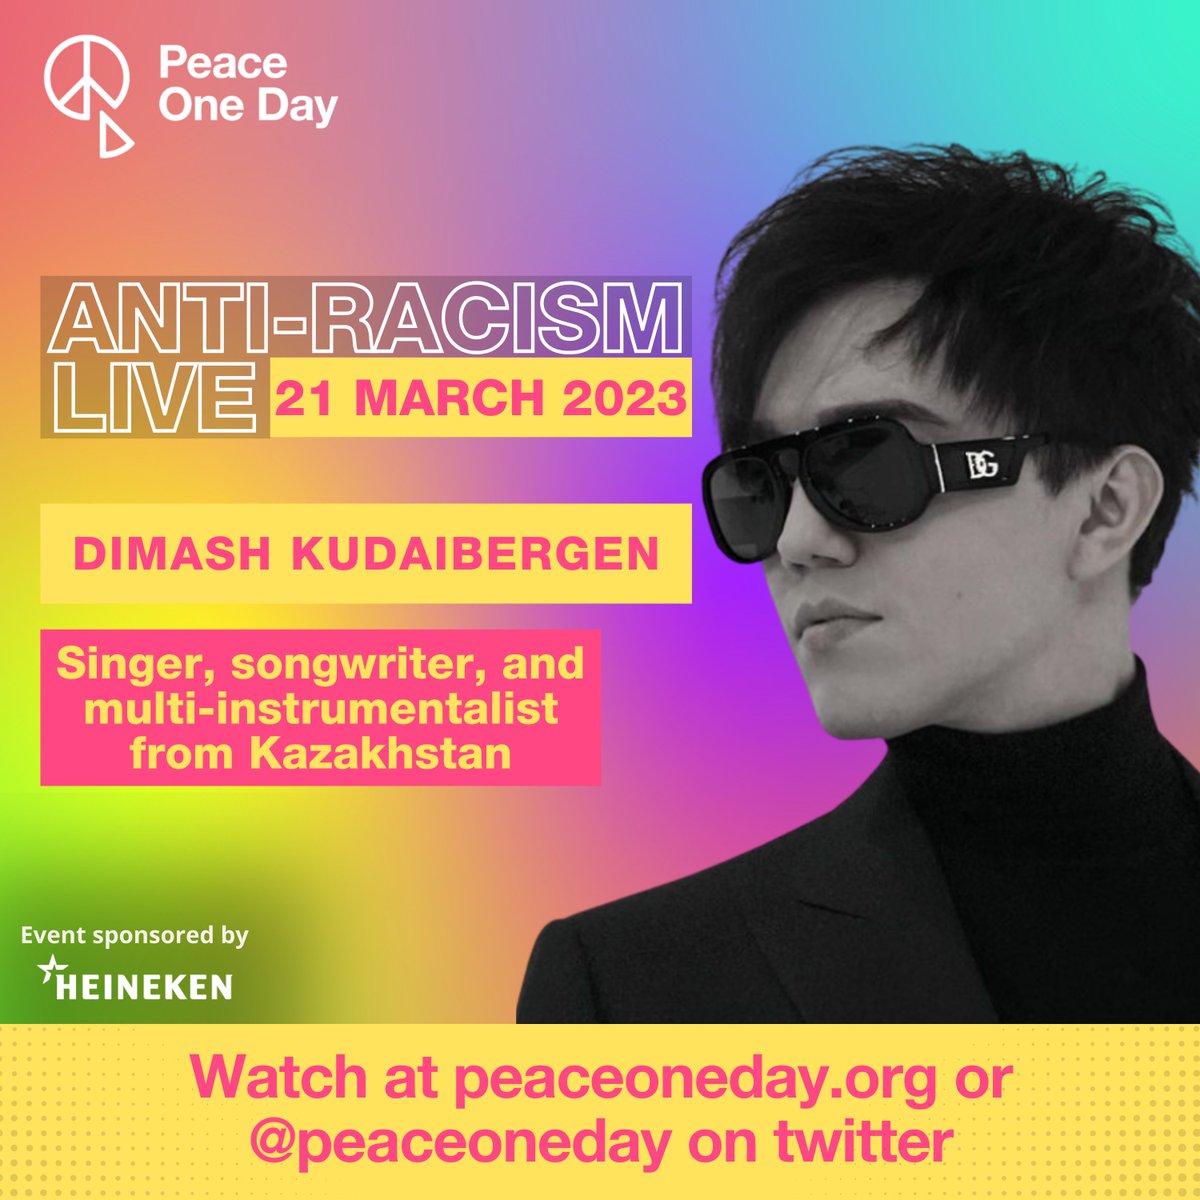 Peace One Day is pleased to announce that Dimash Kudaibergen will be joining us for Anti-Racism Live 21 March 2023. Follow our social media for announcements, and visit peaceoneday.org or @PeaceOneDay on Twitter to watch the broadcast and register for more info.